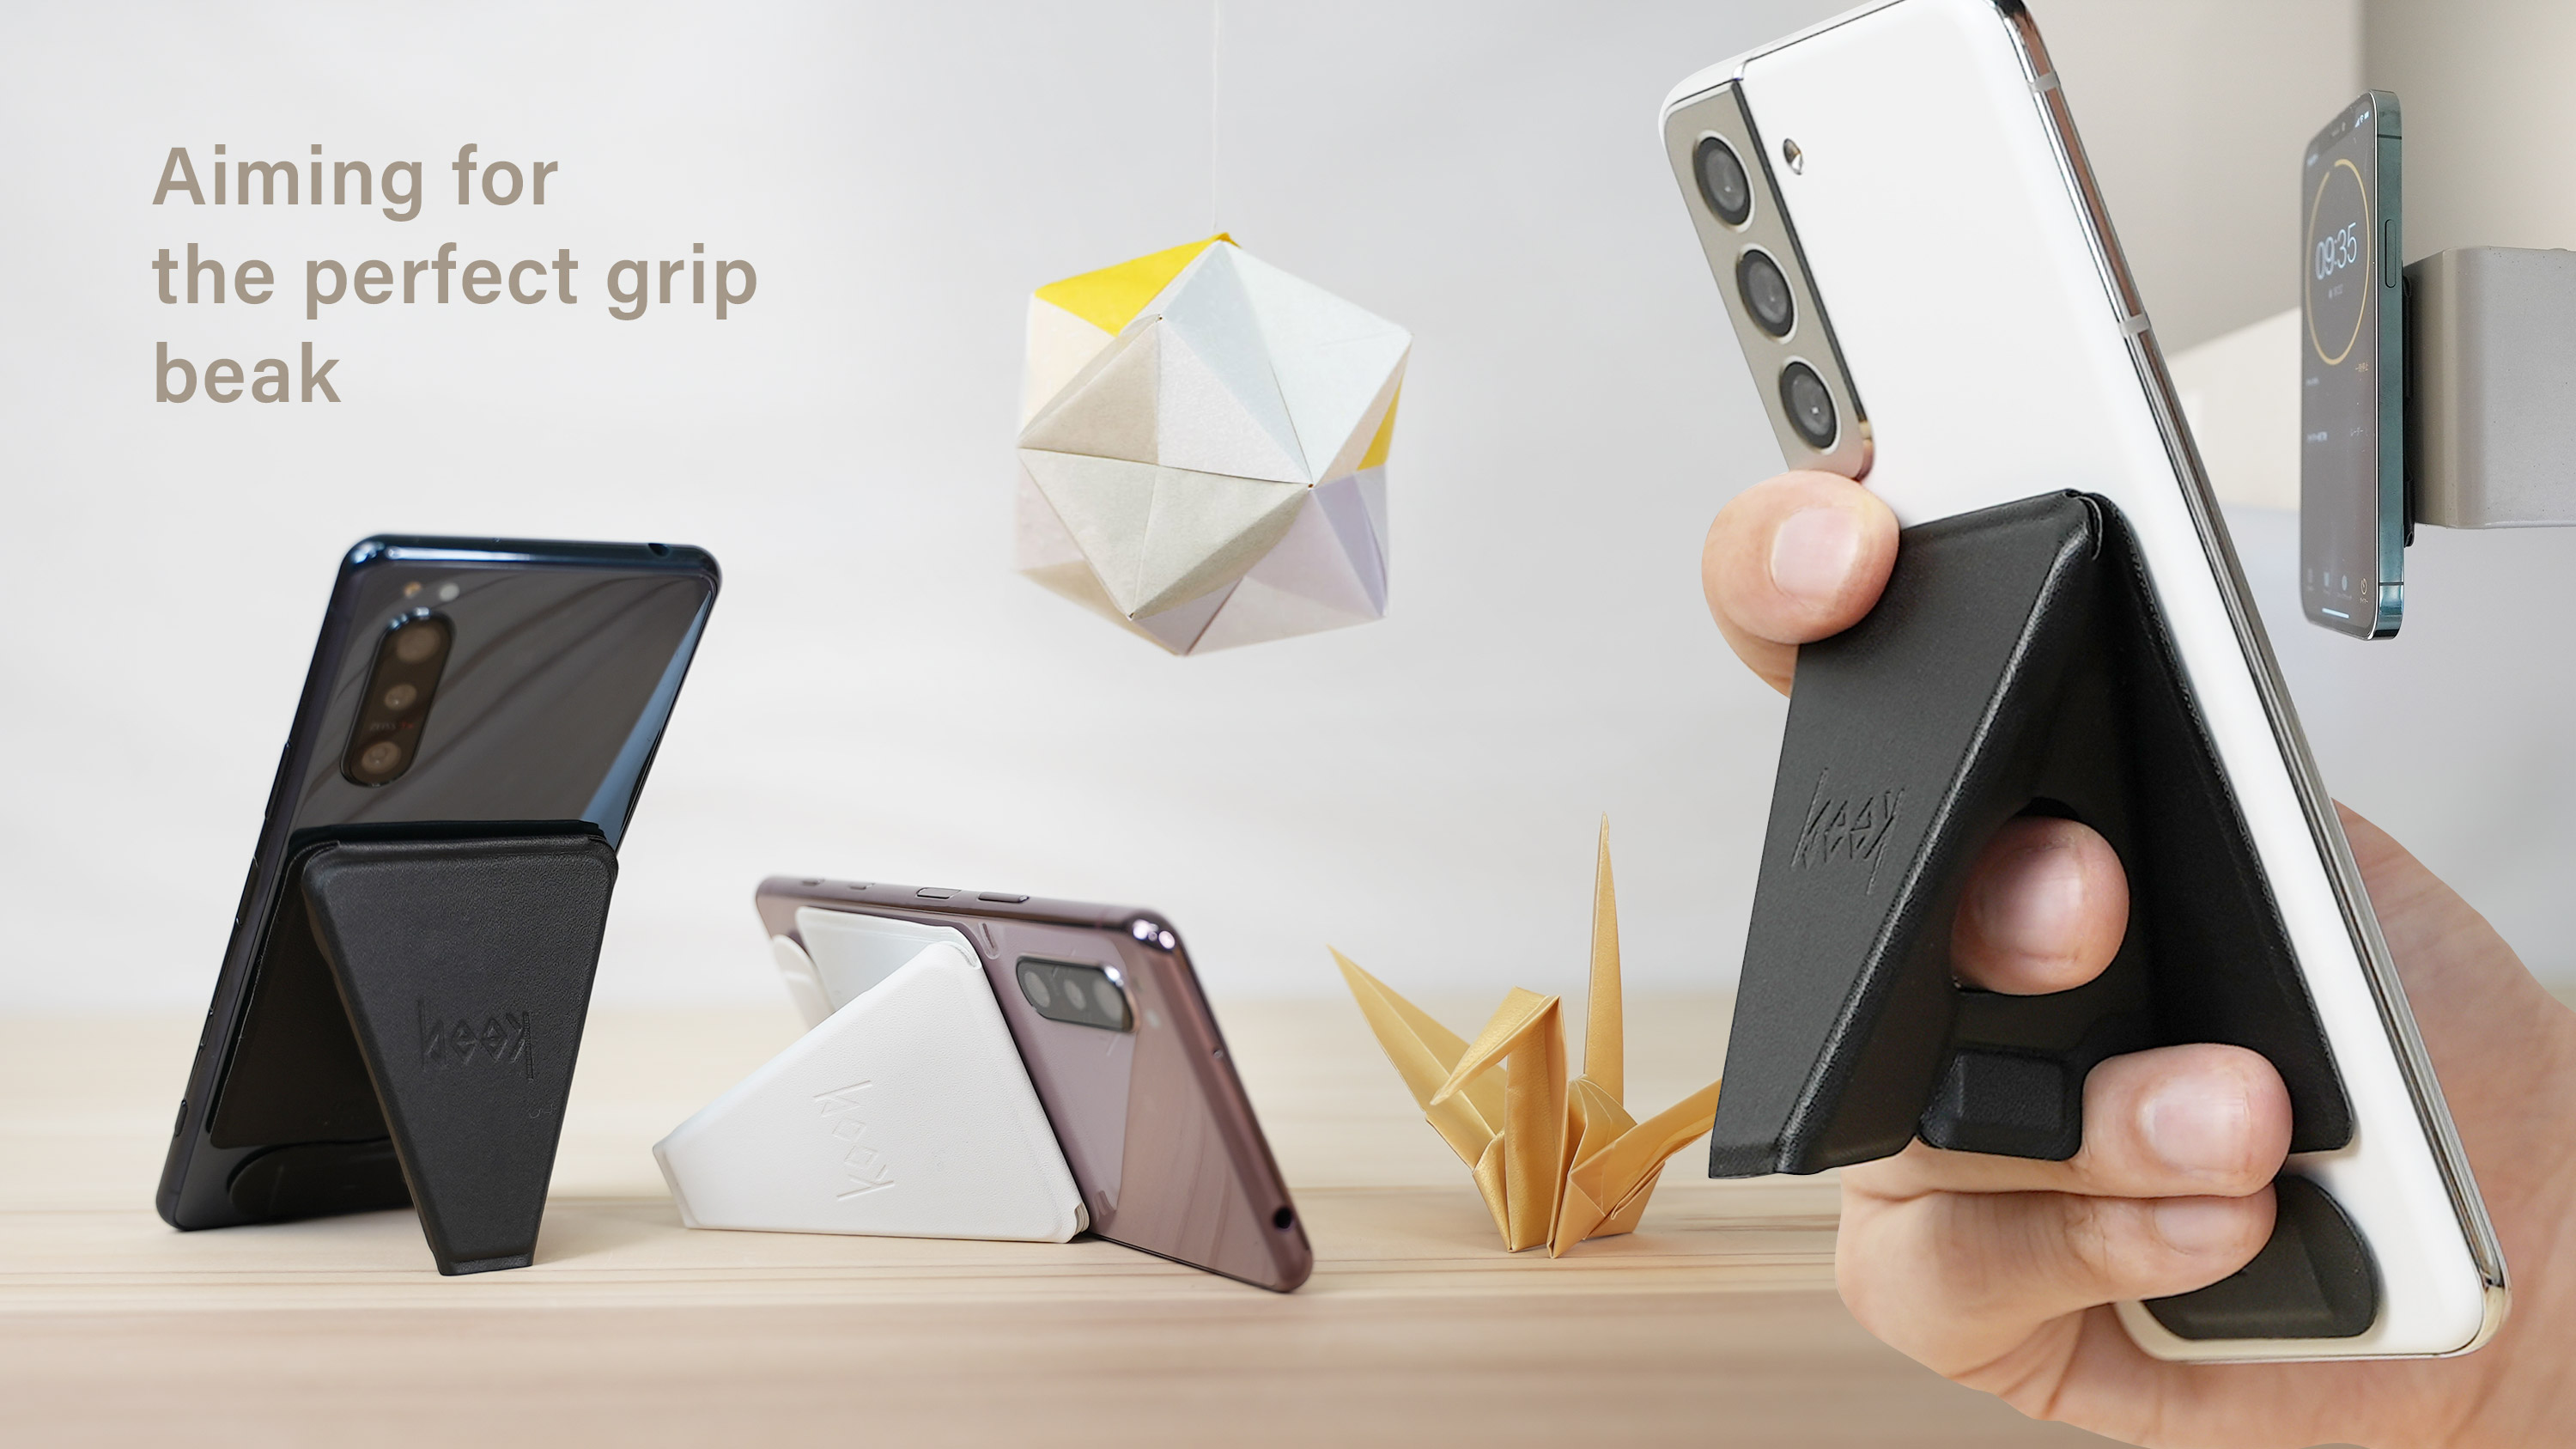 「beak」 the origami inspired 3-in-1 grip for your smartphone